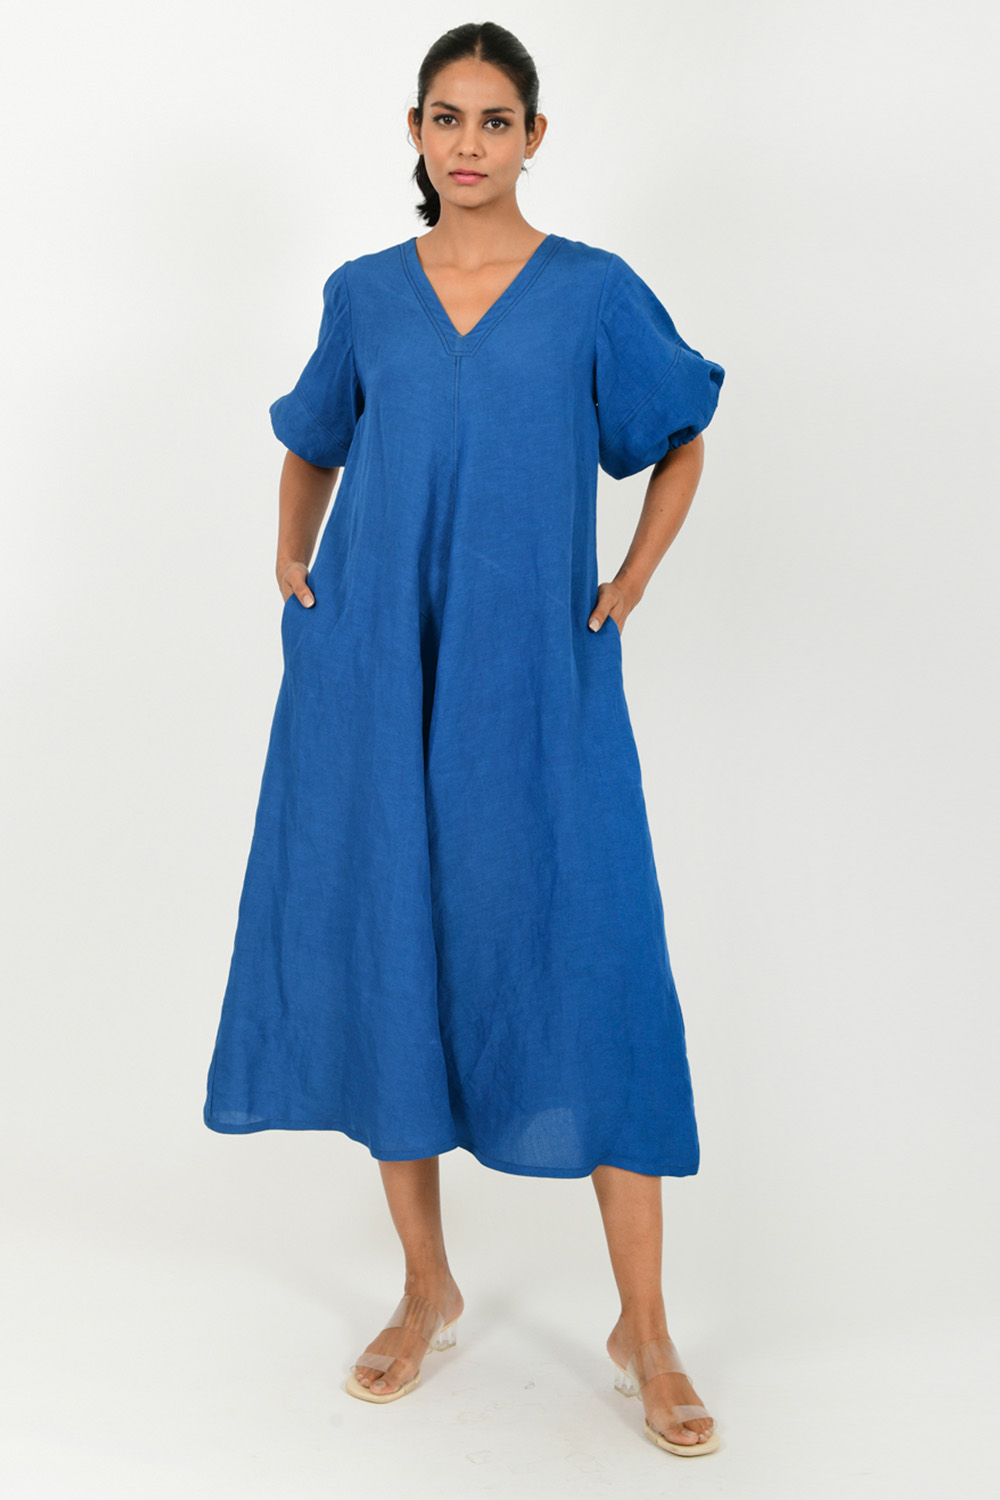 Classic Blue Cotton Dress With Puffed Sleeves 